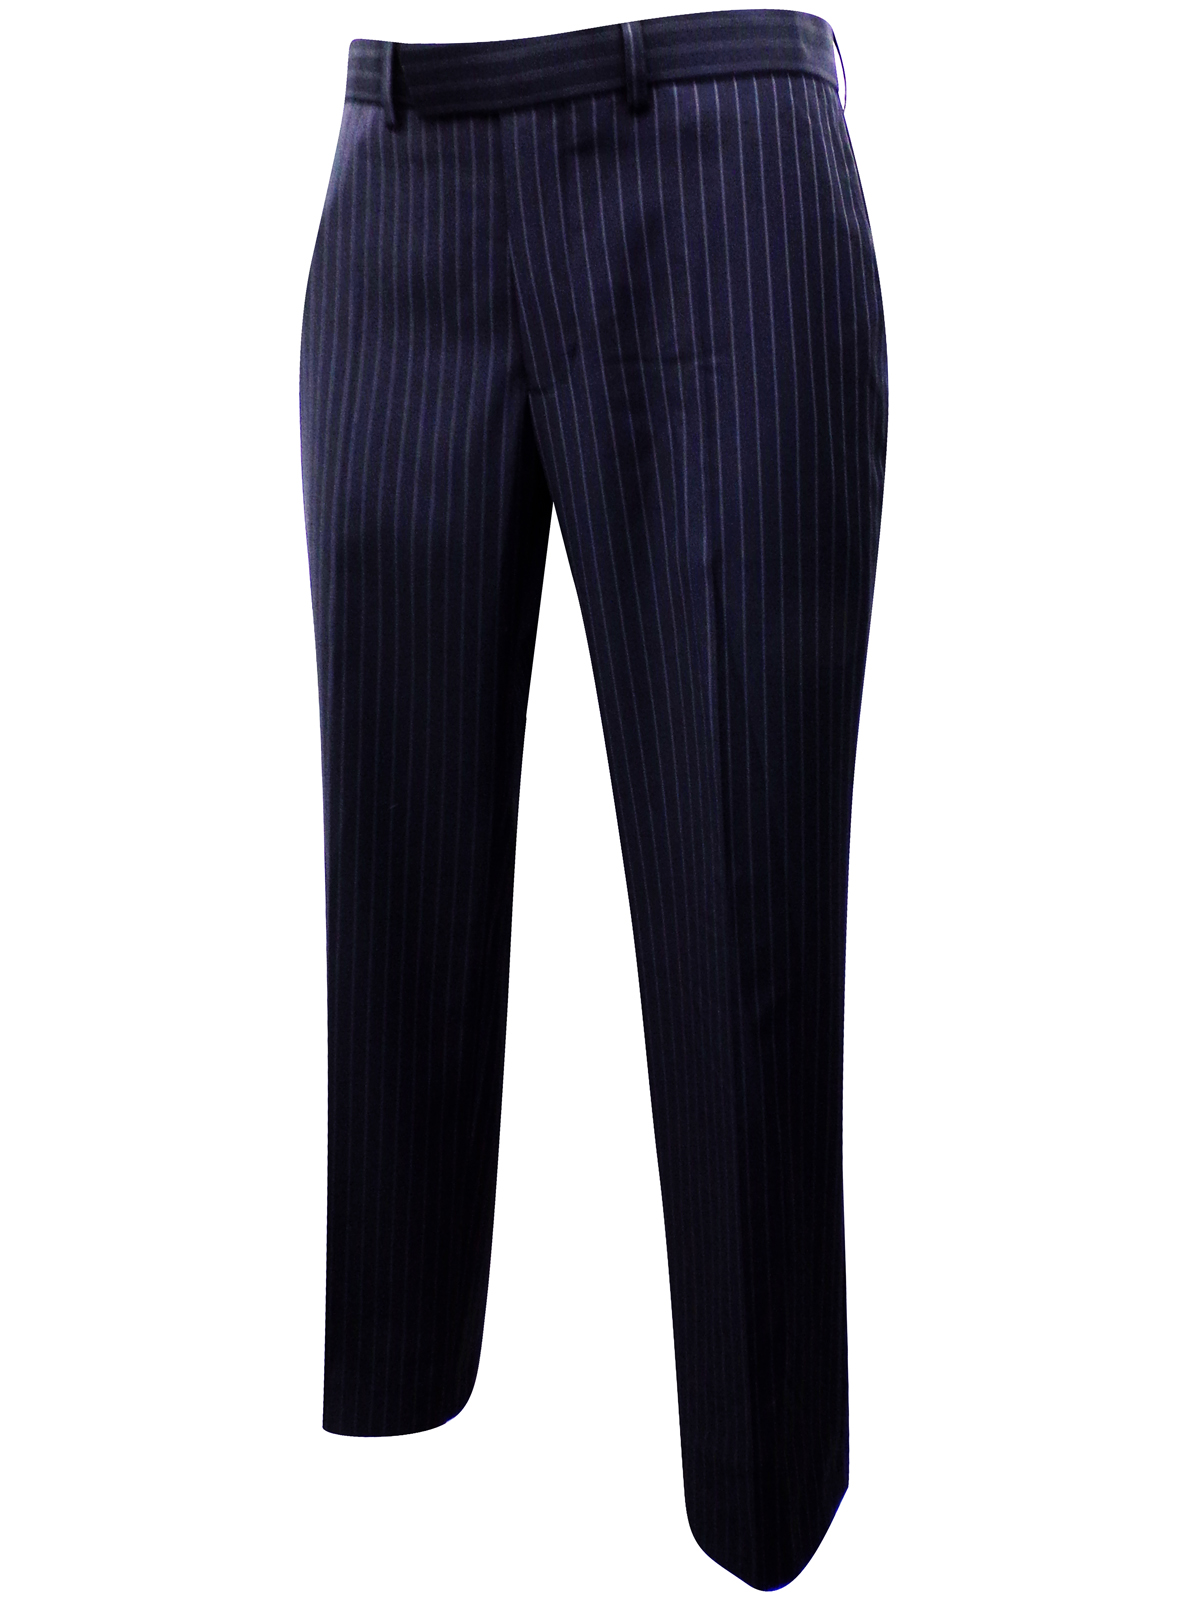 Marks and Spencer - - M&5 BLACK Slim Fit Flat Front Pinstripe Trousers ...